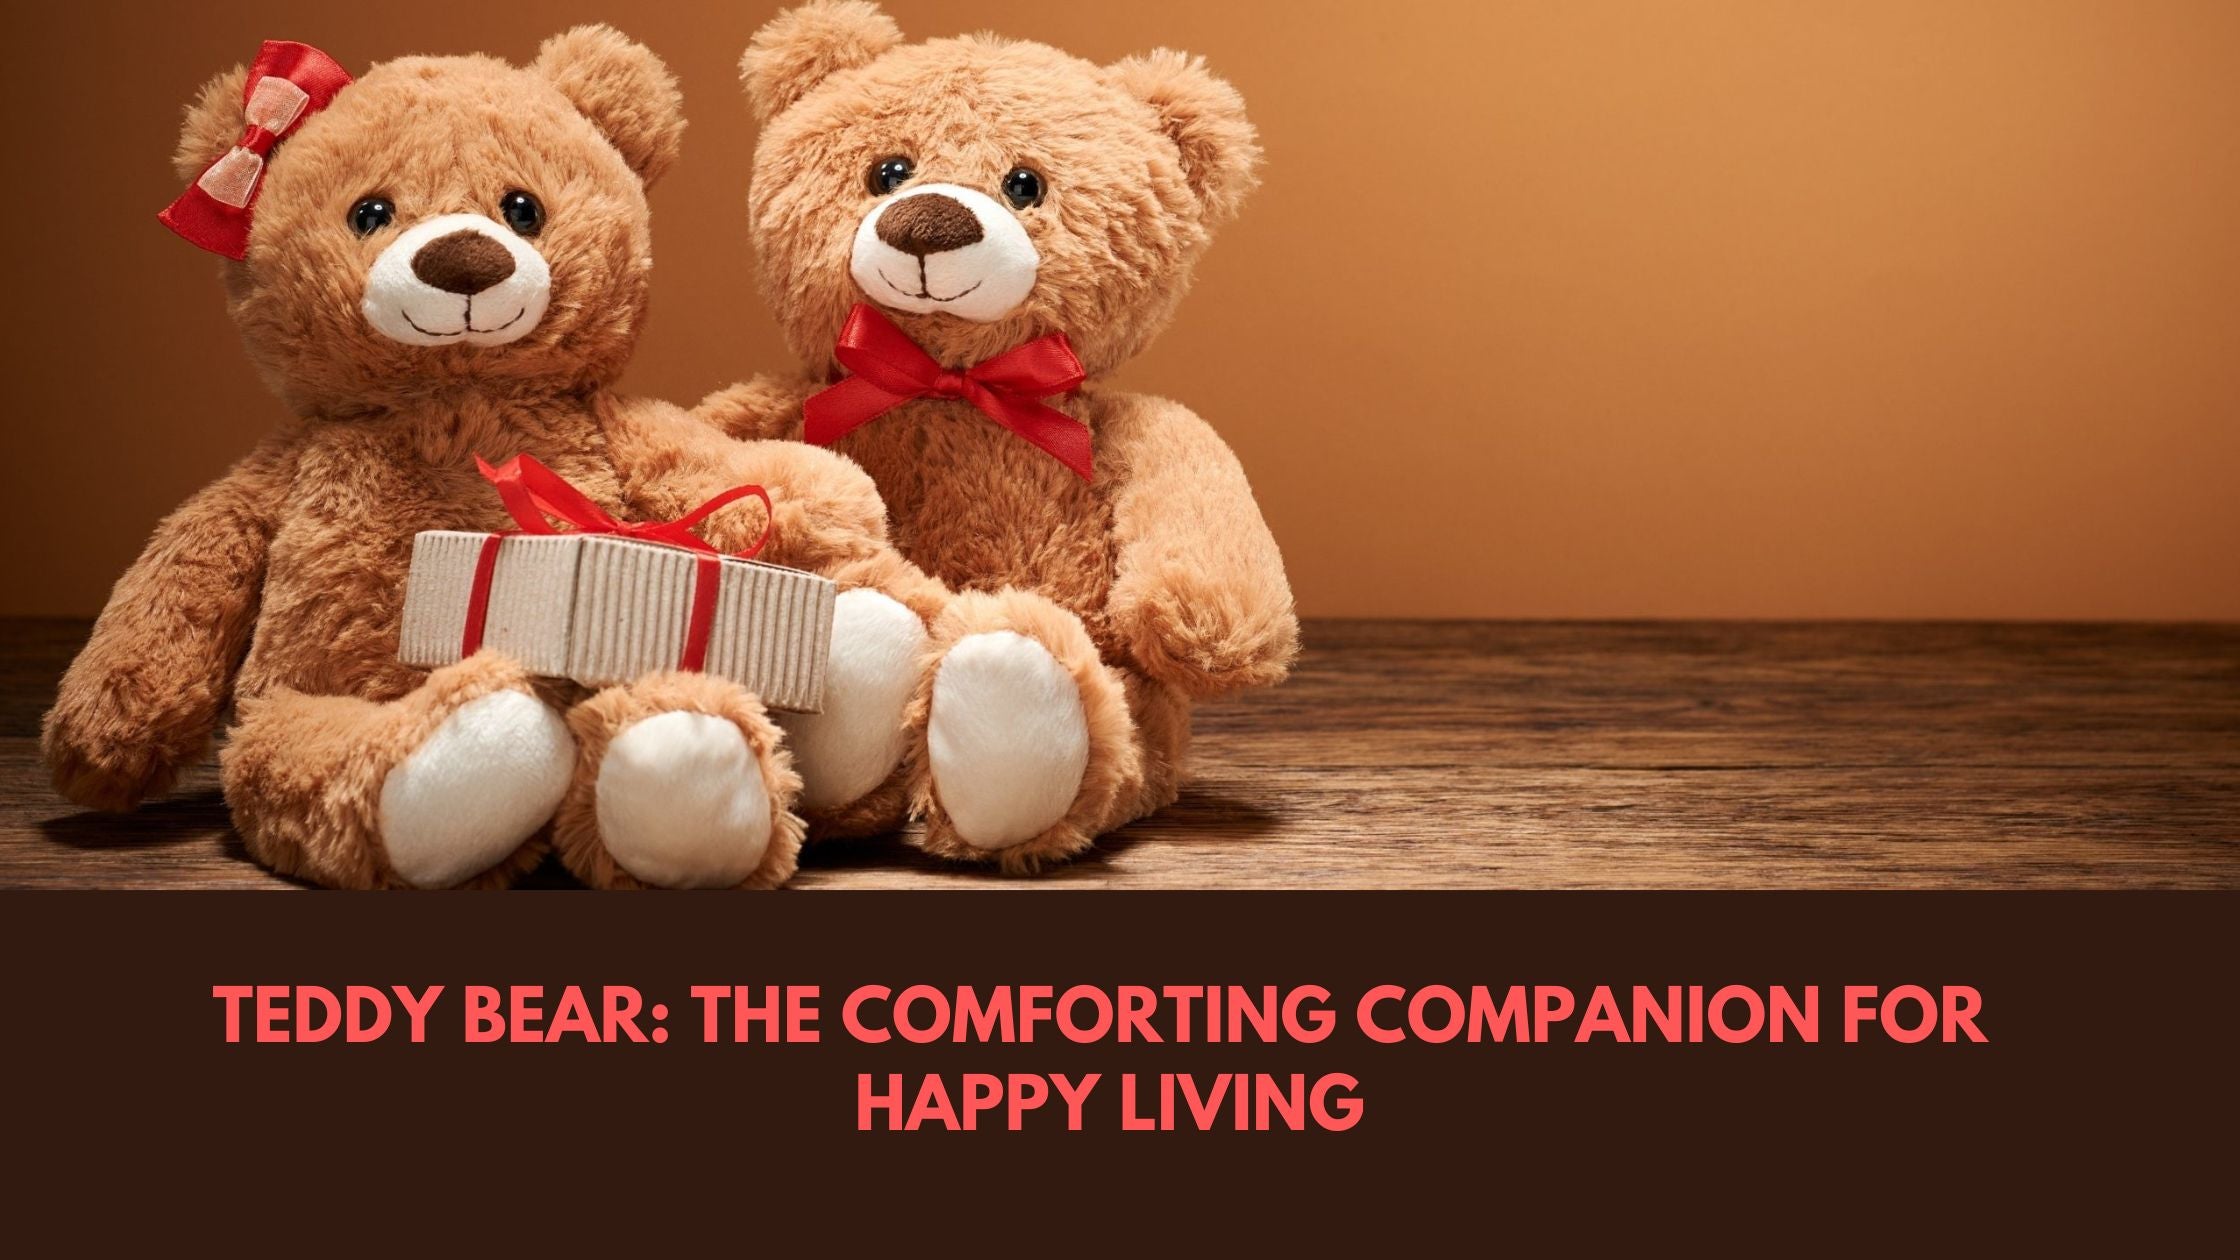 Teddy Bear: The Comforting Companion for Happy Living